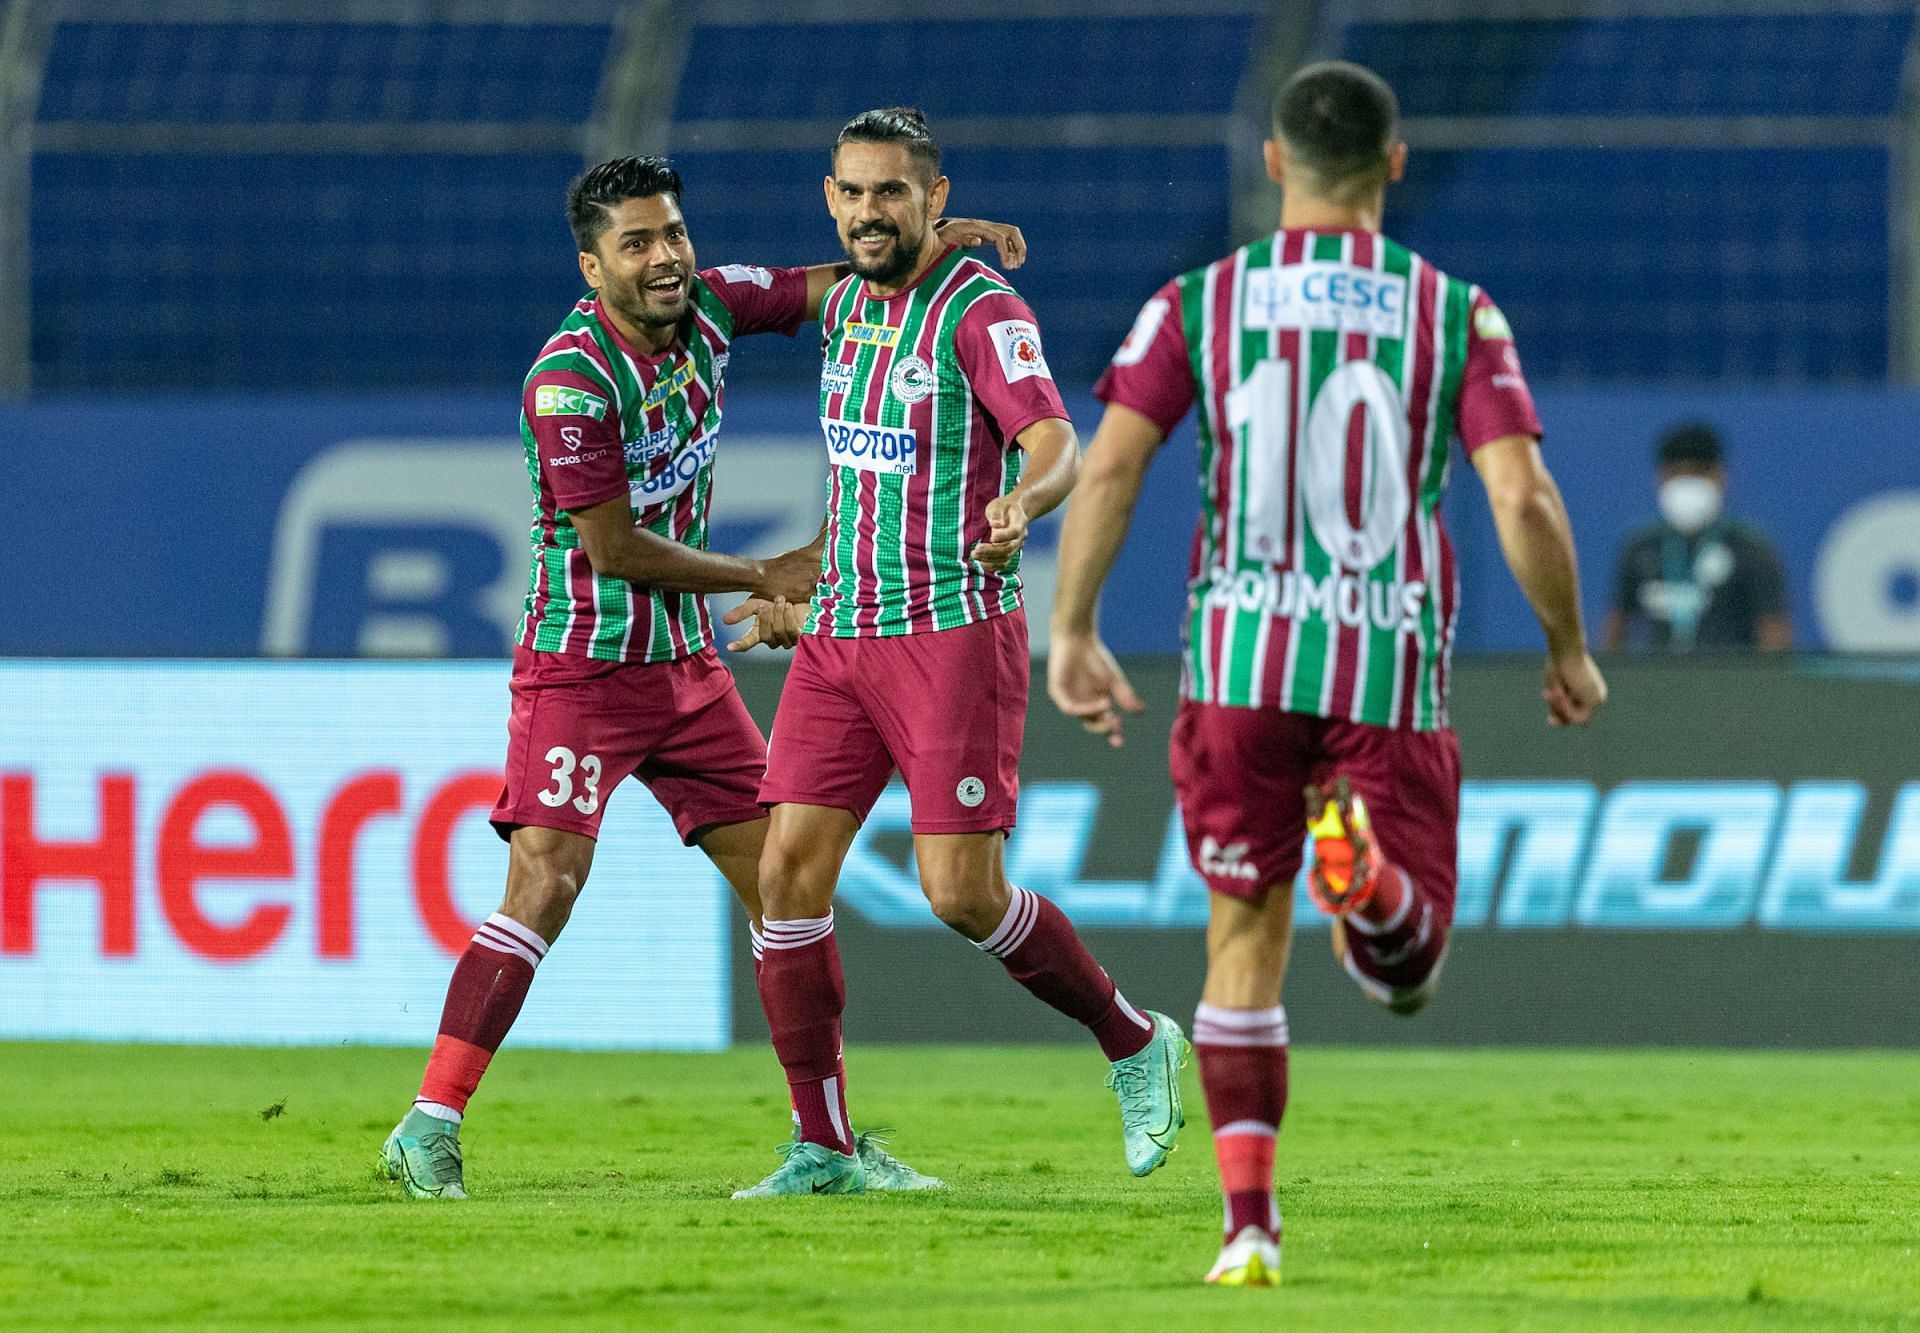 ATK Mohun Bagan&#039;s David Willaims scored the fastest goal in the history of the ISL (Image Courtesy: ISL)